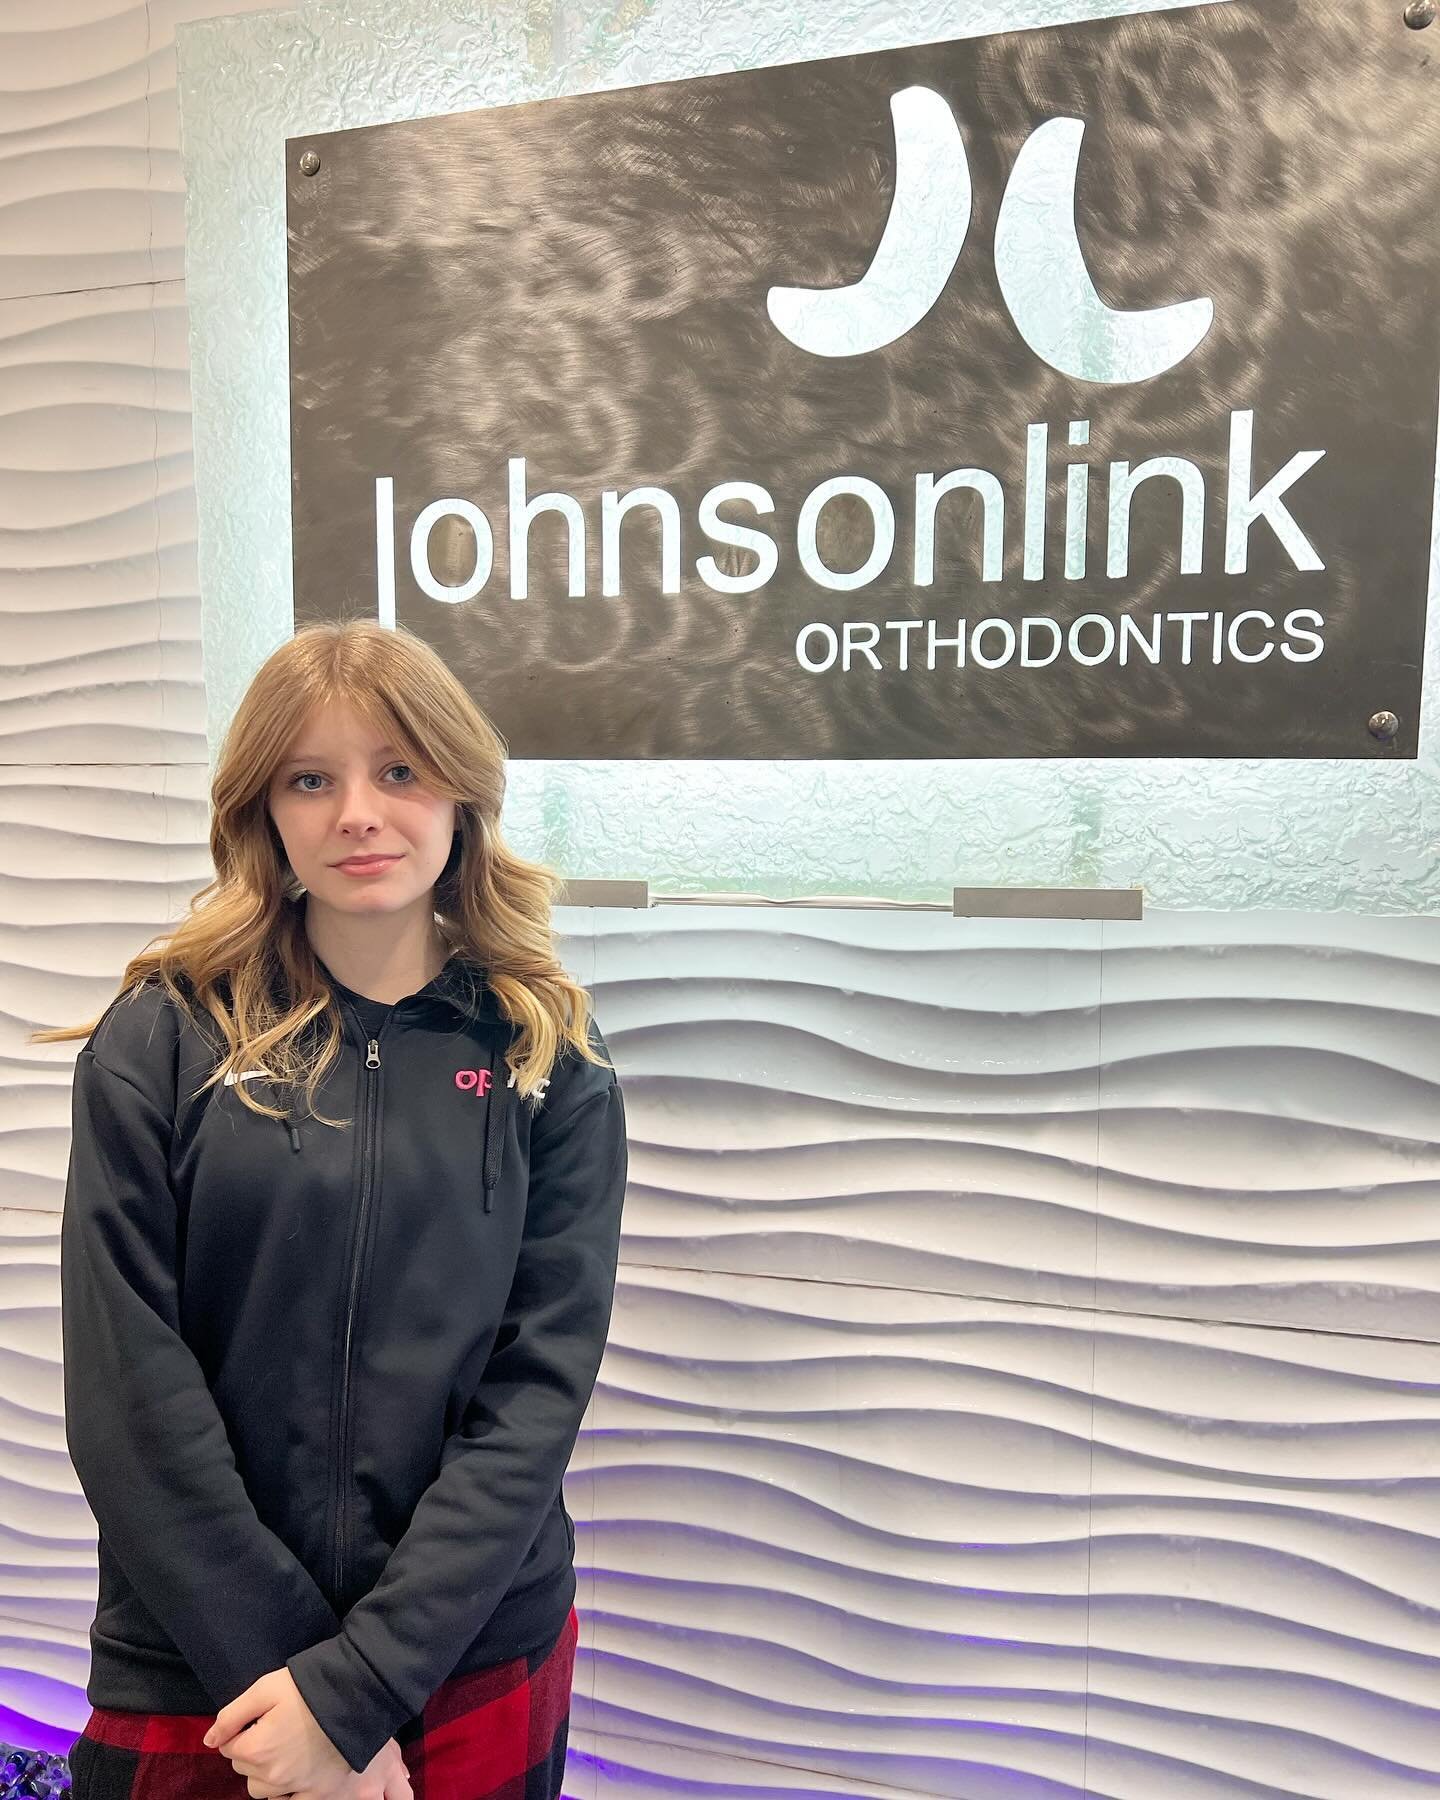 We have the best patients 💙 
&bull;
&bull;
&bull;
Congratulations Bella! She is our winner of our Color of the Month contest! 
#Invisalign #Johnsonlinkortho #colorofthemonth #Johnsonlinkorthodontics #Braces #Loveyoursmile #JLOrtho #Upgradeyoursmile 